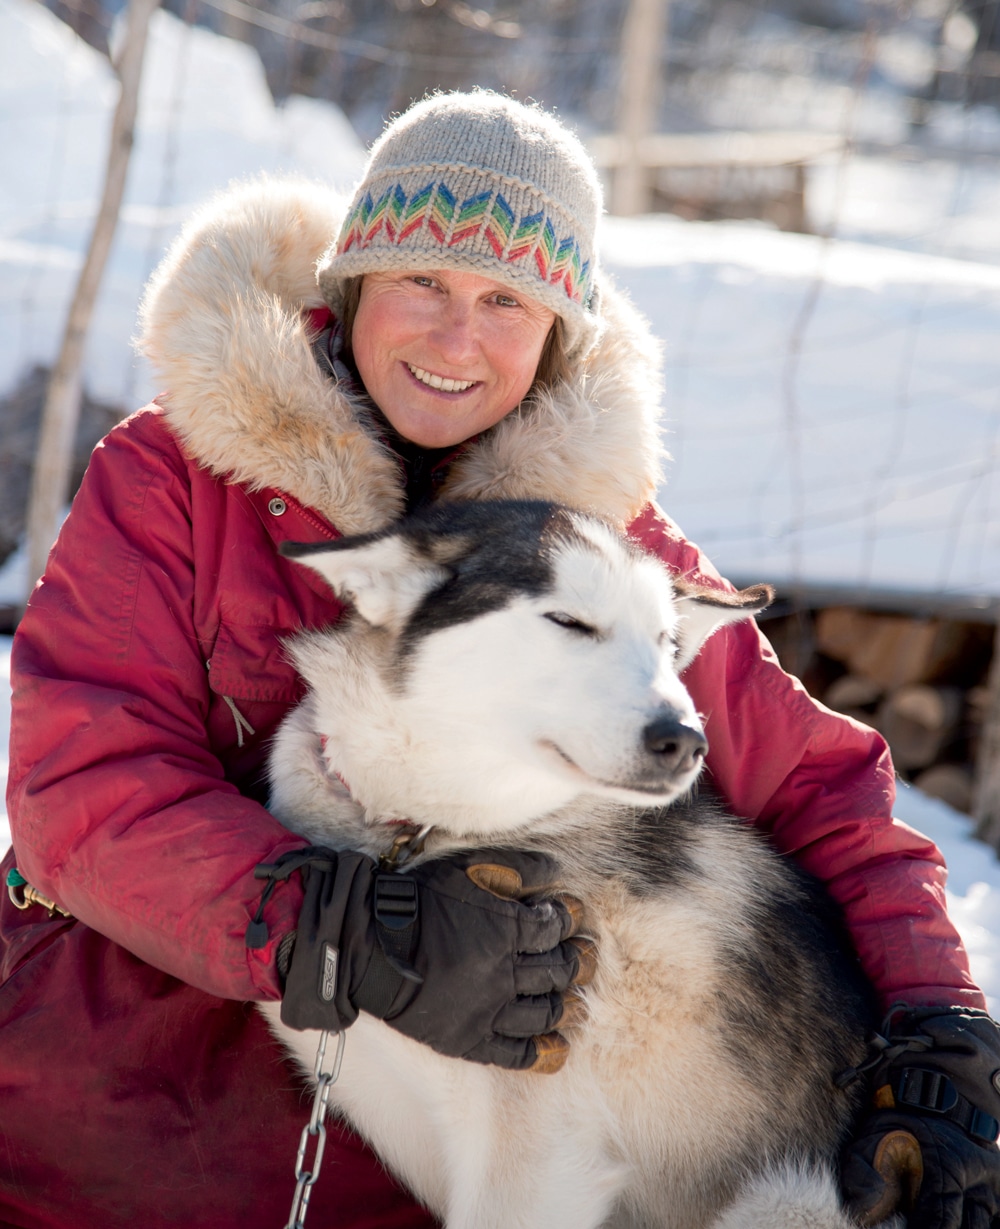 Mahoosuc Guide Service’s Polly Mahoney with one of her Yukon huskies, Myrtle. The pack’s largest female, she was named for Mahoney’s great-aunt.